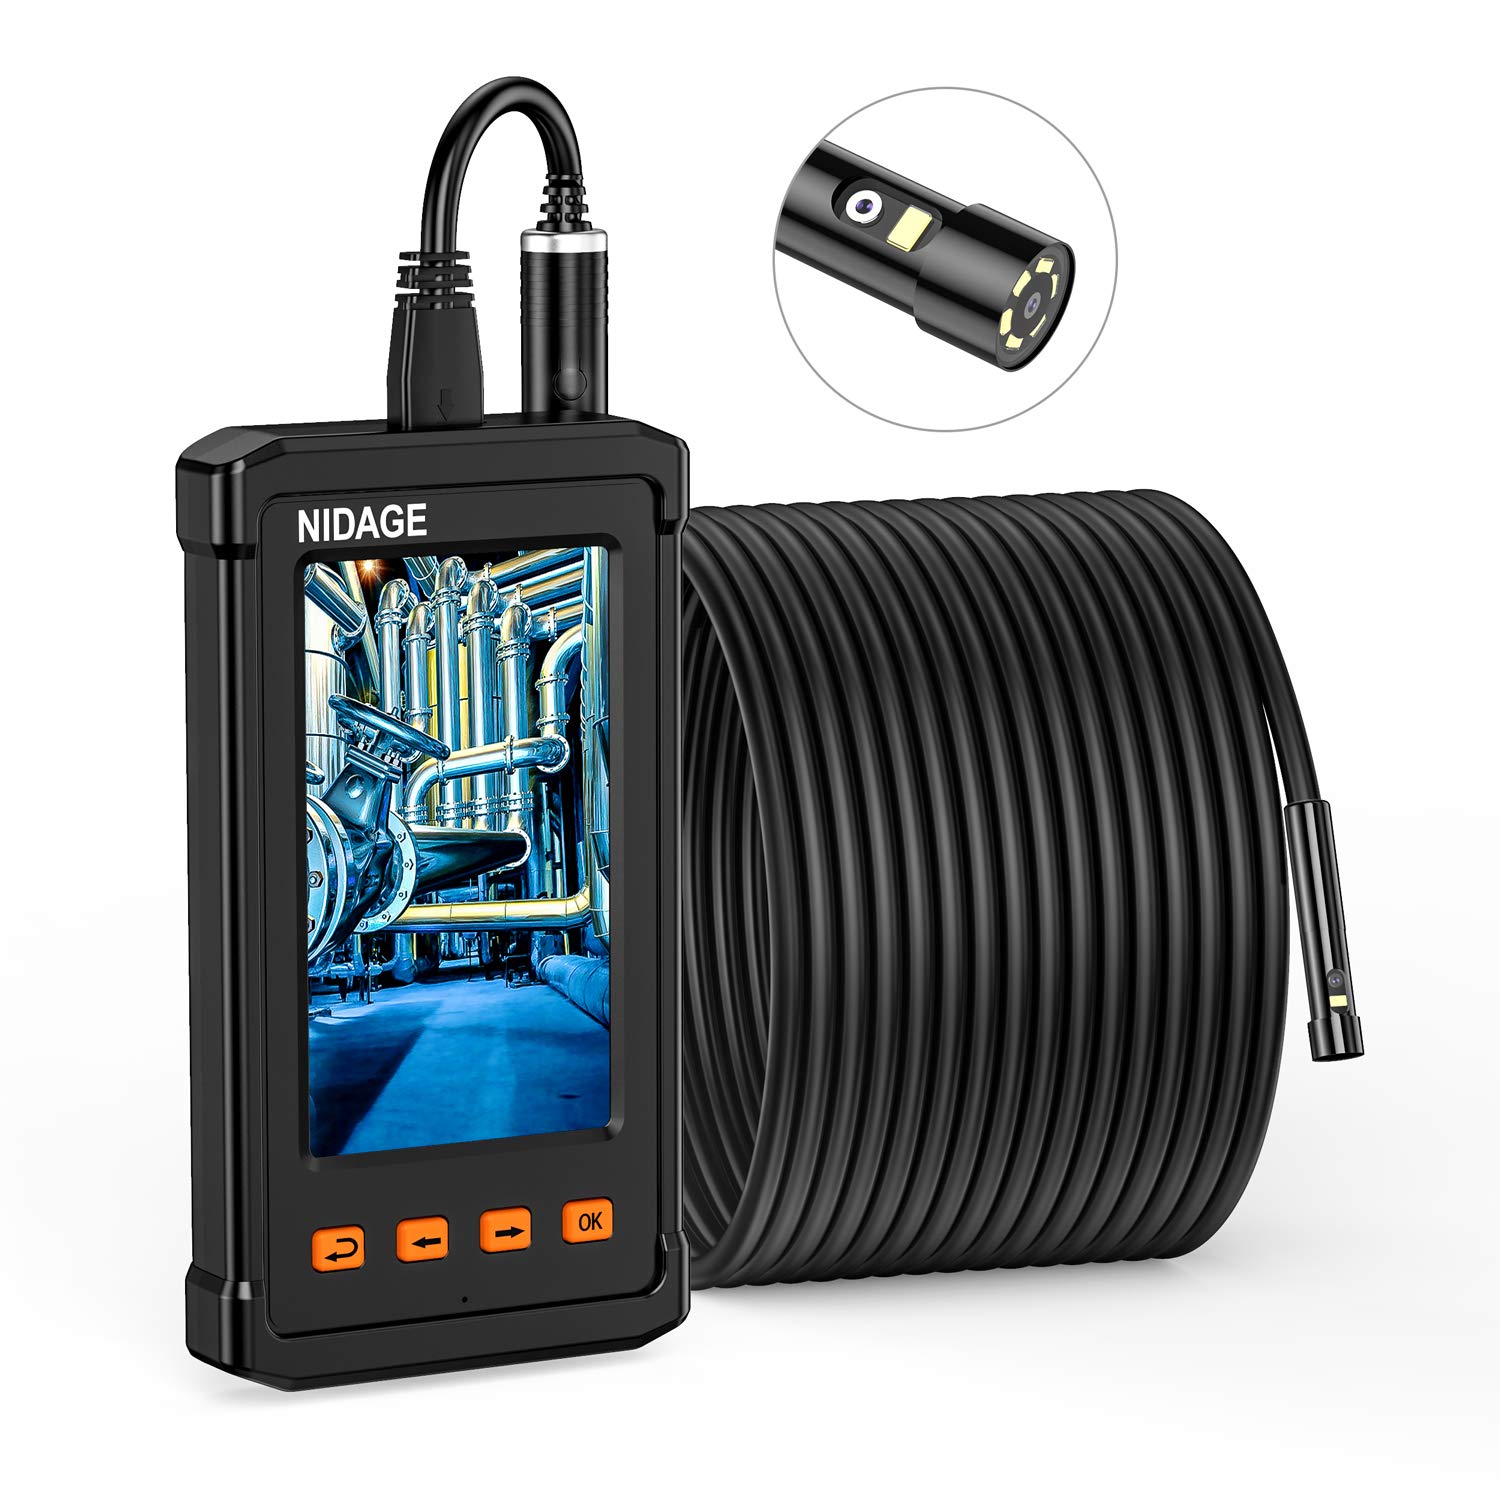 NIDAGE Dual Lens Endoscope, 33FT Industrial Borescope Camera 1080P HD Inspection Camera with 4.3inch IPS Screen, 32GB Card, 7 Led Lights, Waterproof Snake Camera with Semi-Rigid Cable